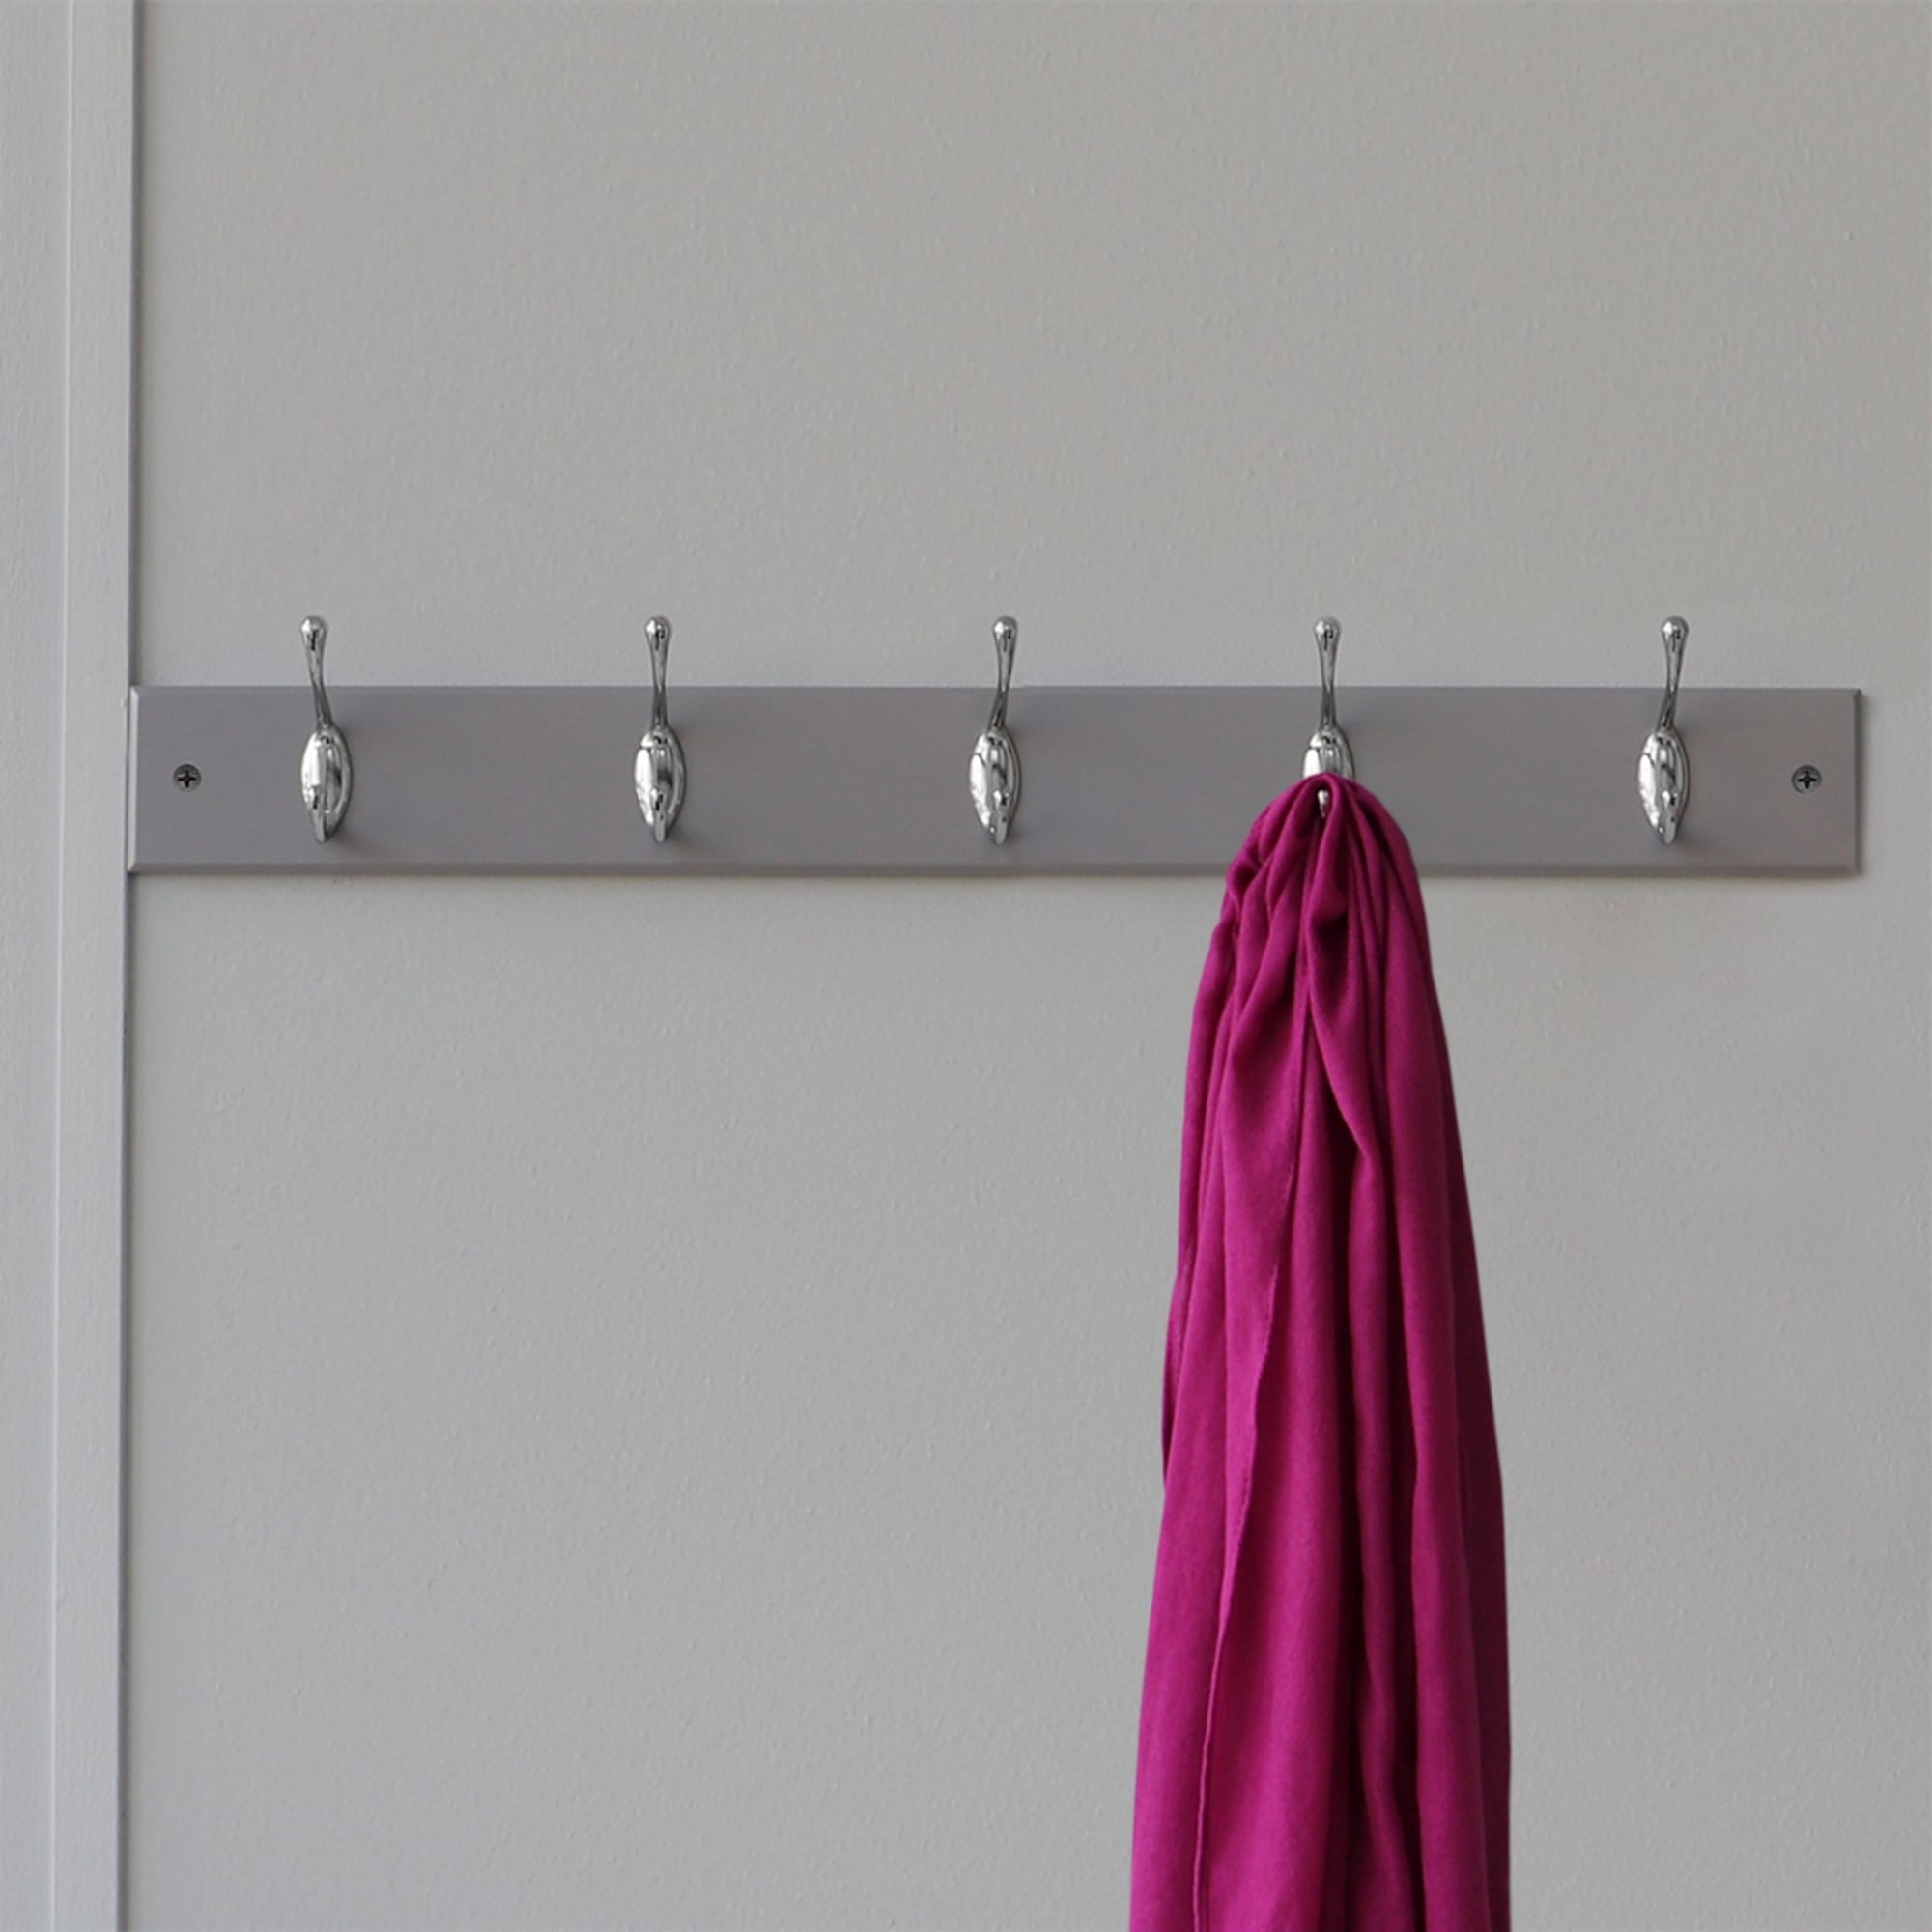 Home Basics 5 Double Hook Wall Mounted Hanging Rack, Grey $12.00 EACH, CASE PACK OF 12